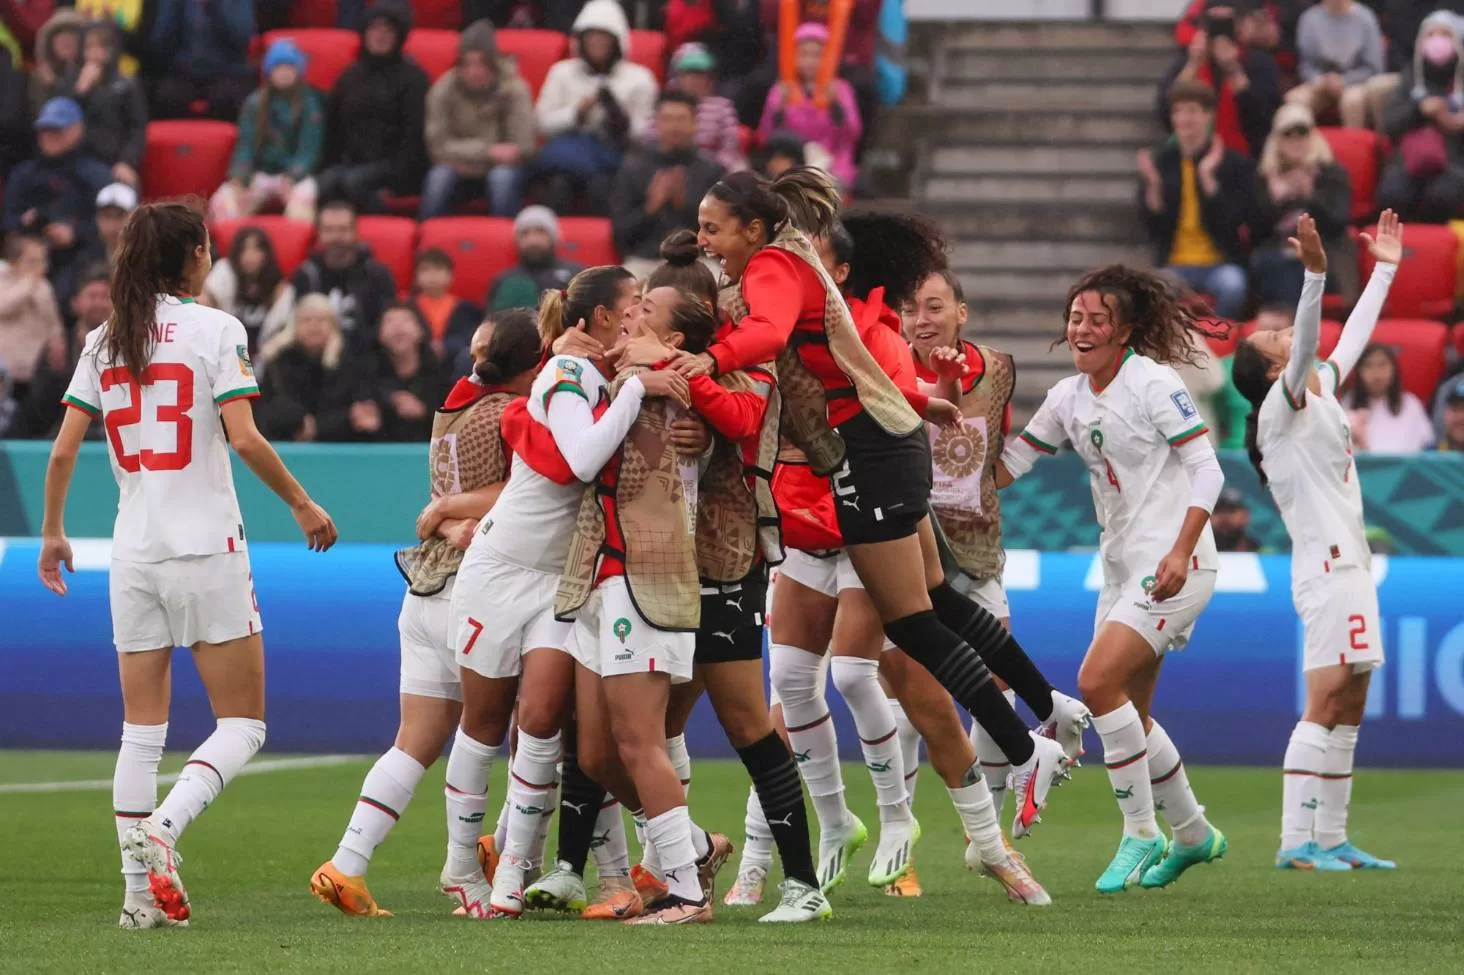 Morocco claims a historic win over south Korea in the women's world cup